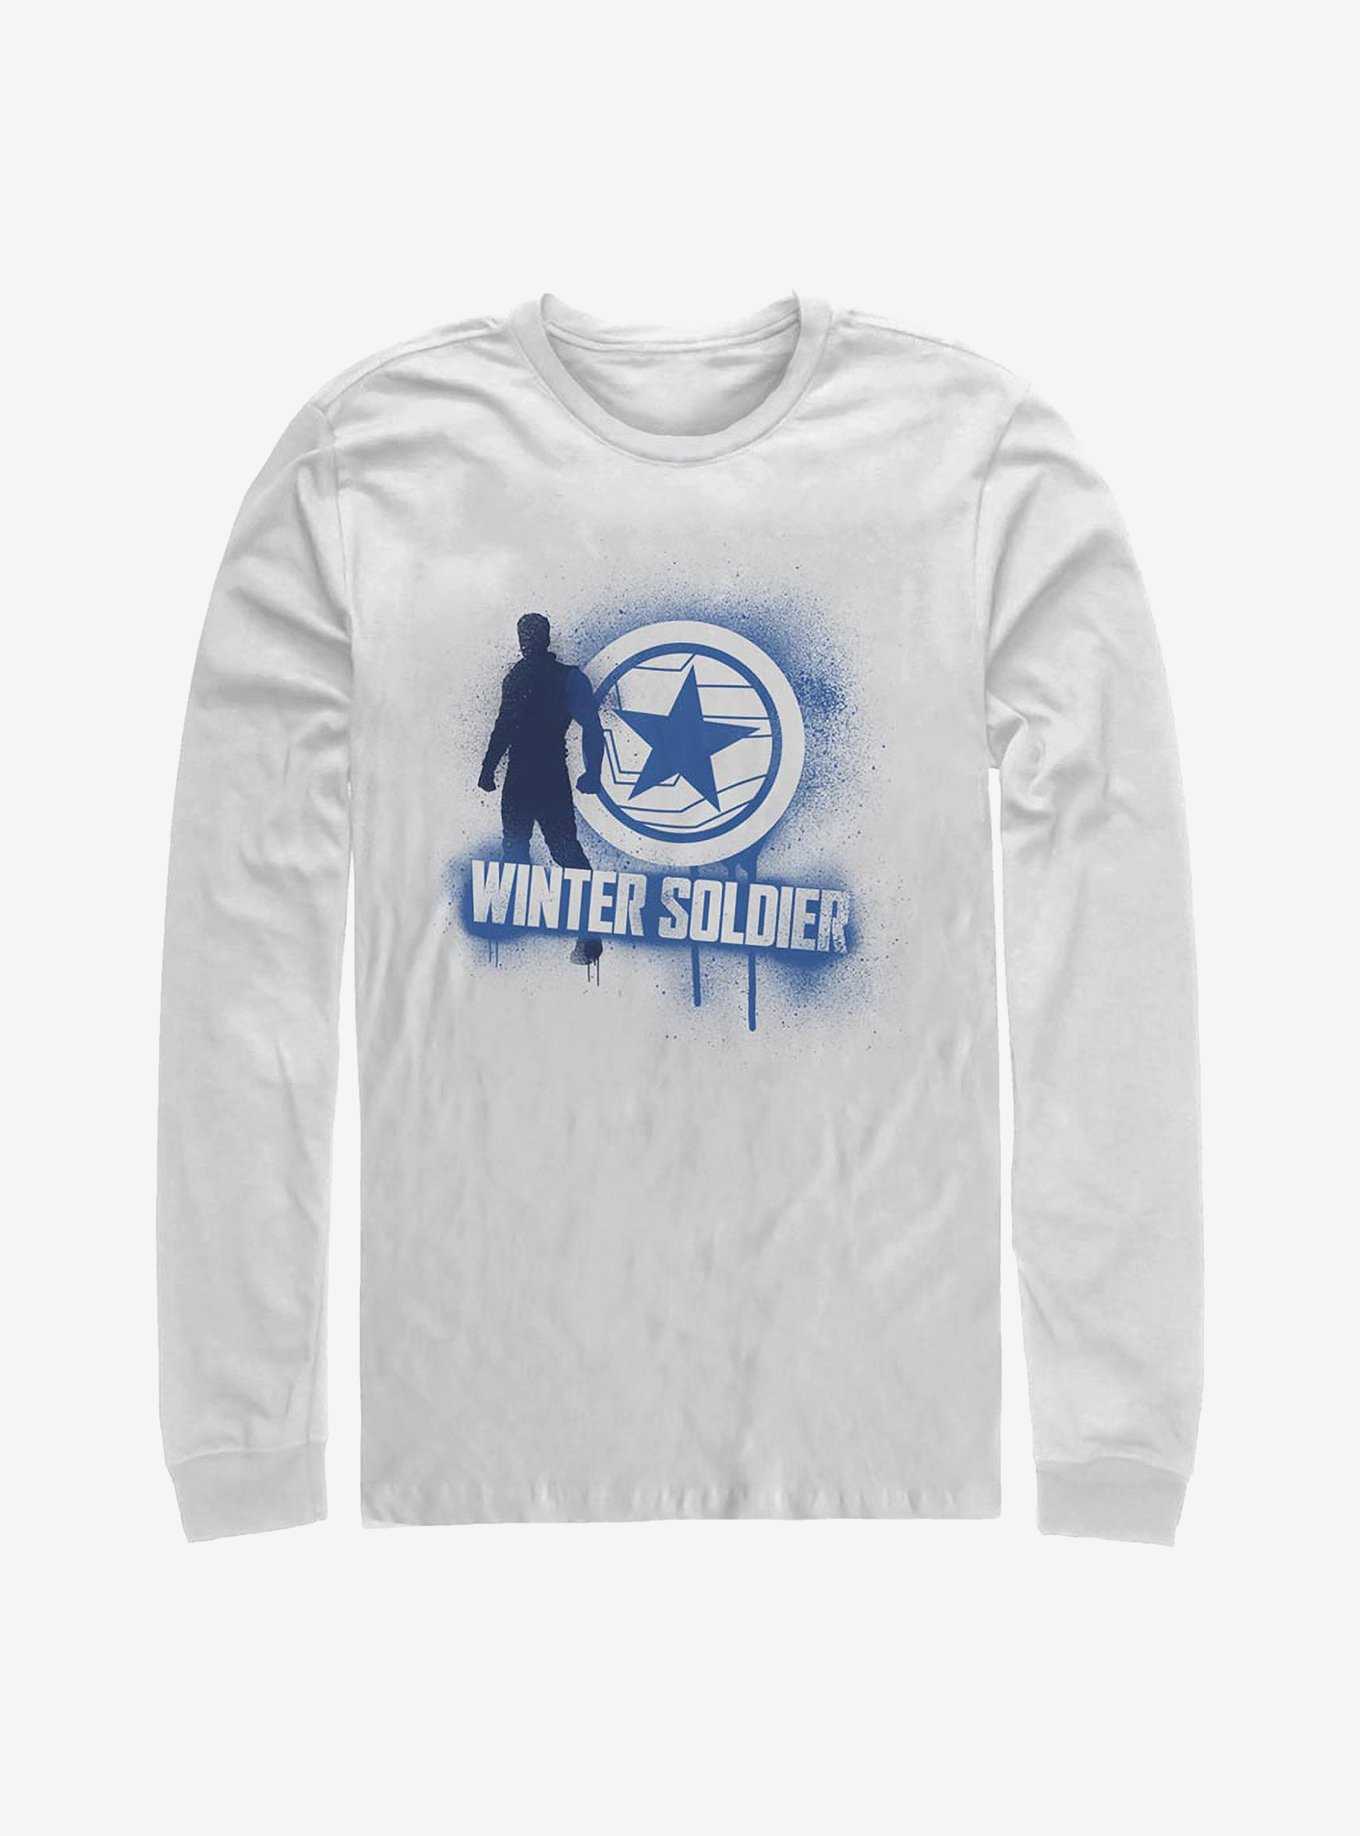 Marvel The Falcon And The Winter Soldier Spray Paint Long-Sleeve T-Shirt, , hi-res